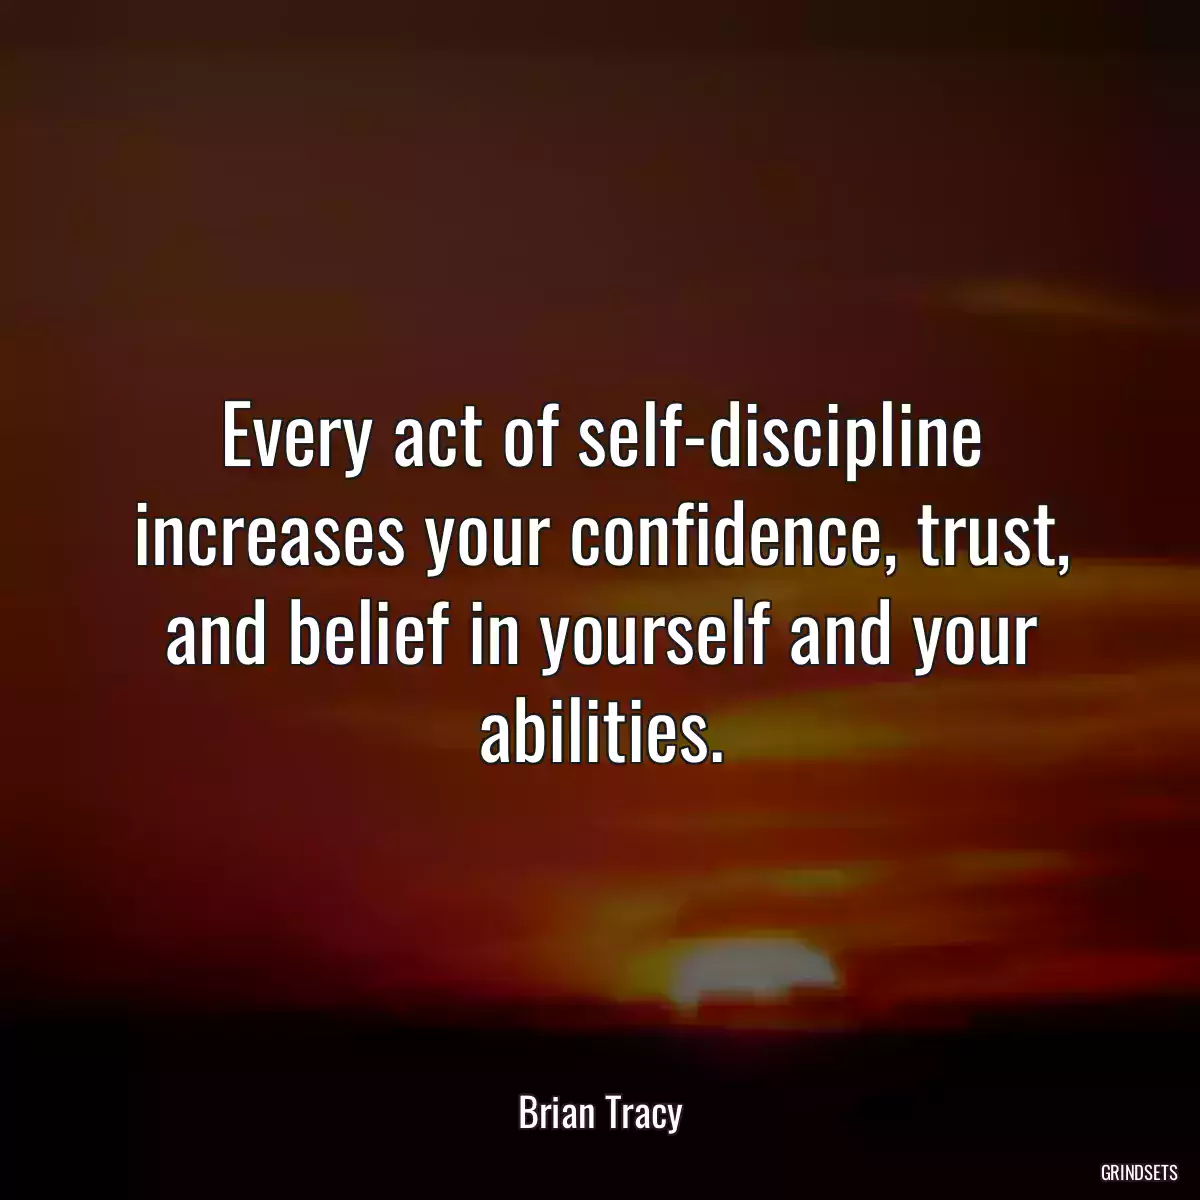 Every act of self-discipline increases your confidence, trust, and belief in yourself and your abilities.